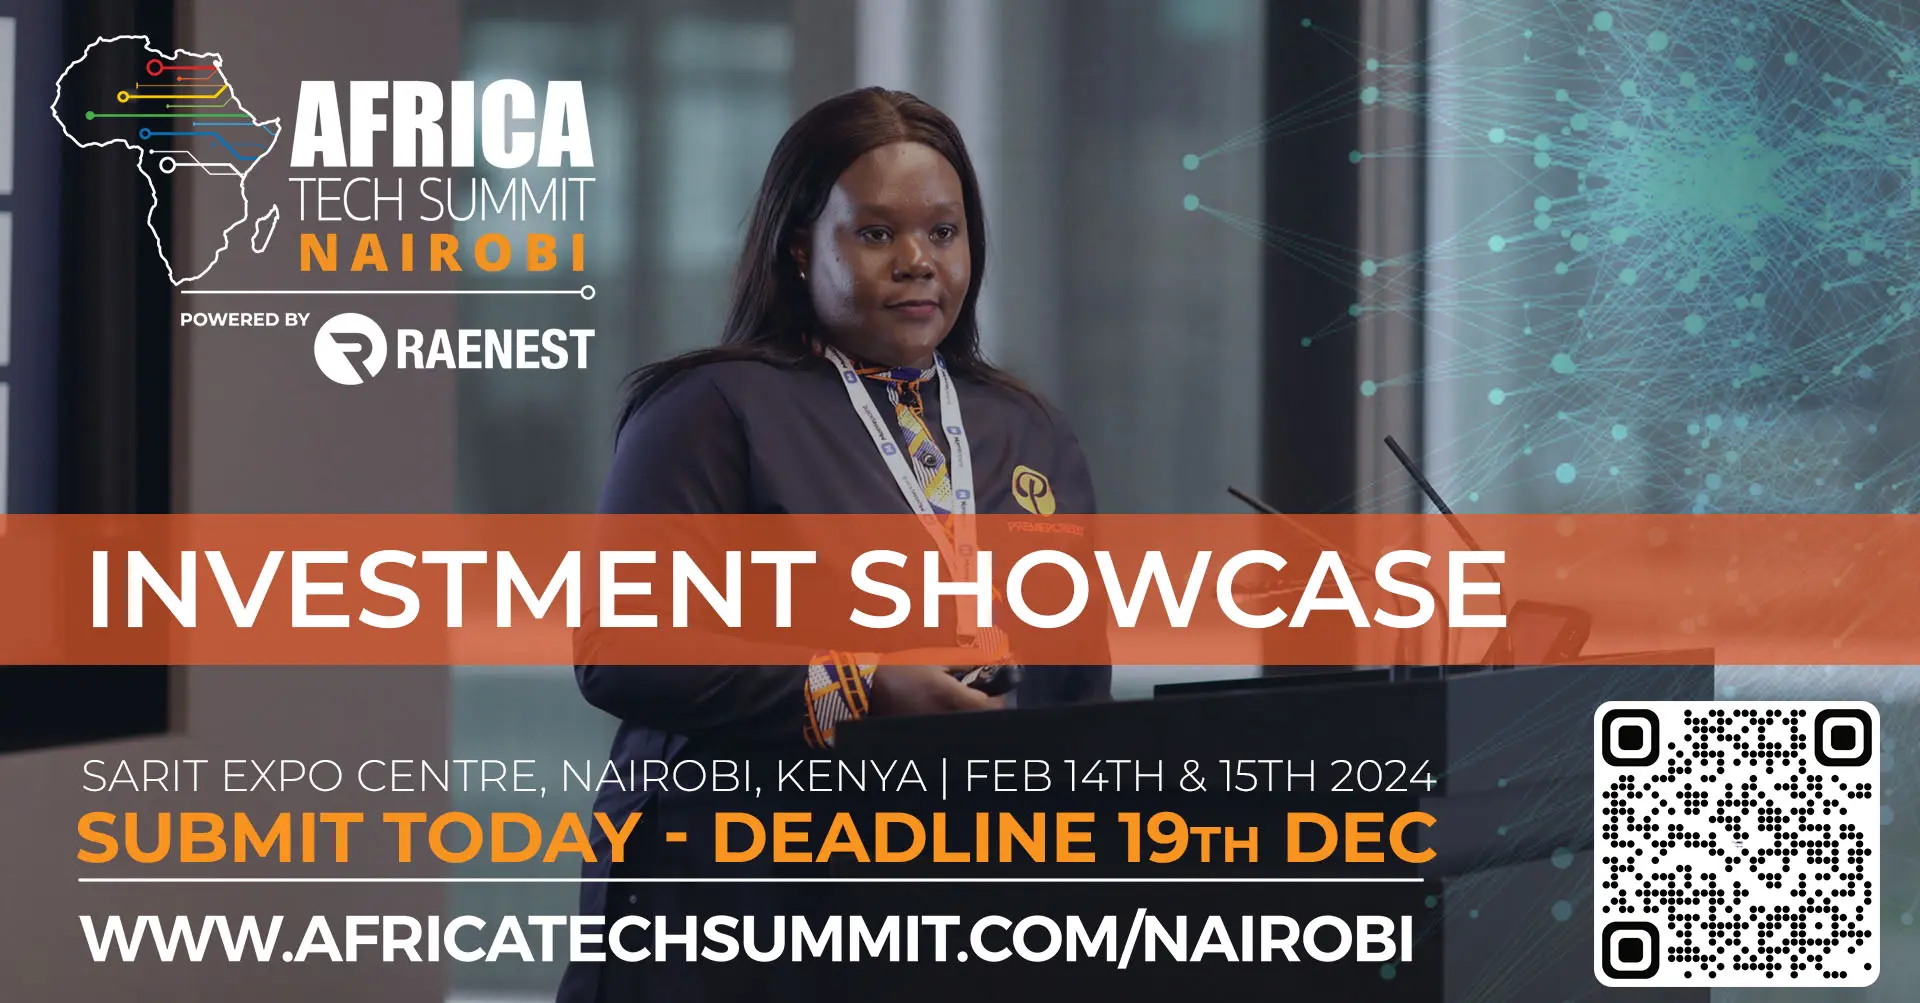 Venture applications open for the Africa Tech Summit Nairobi 2024 Investment Showcase